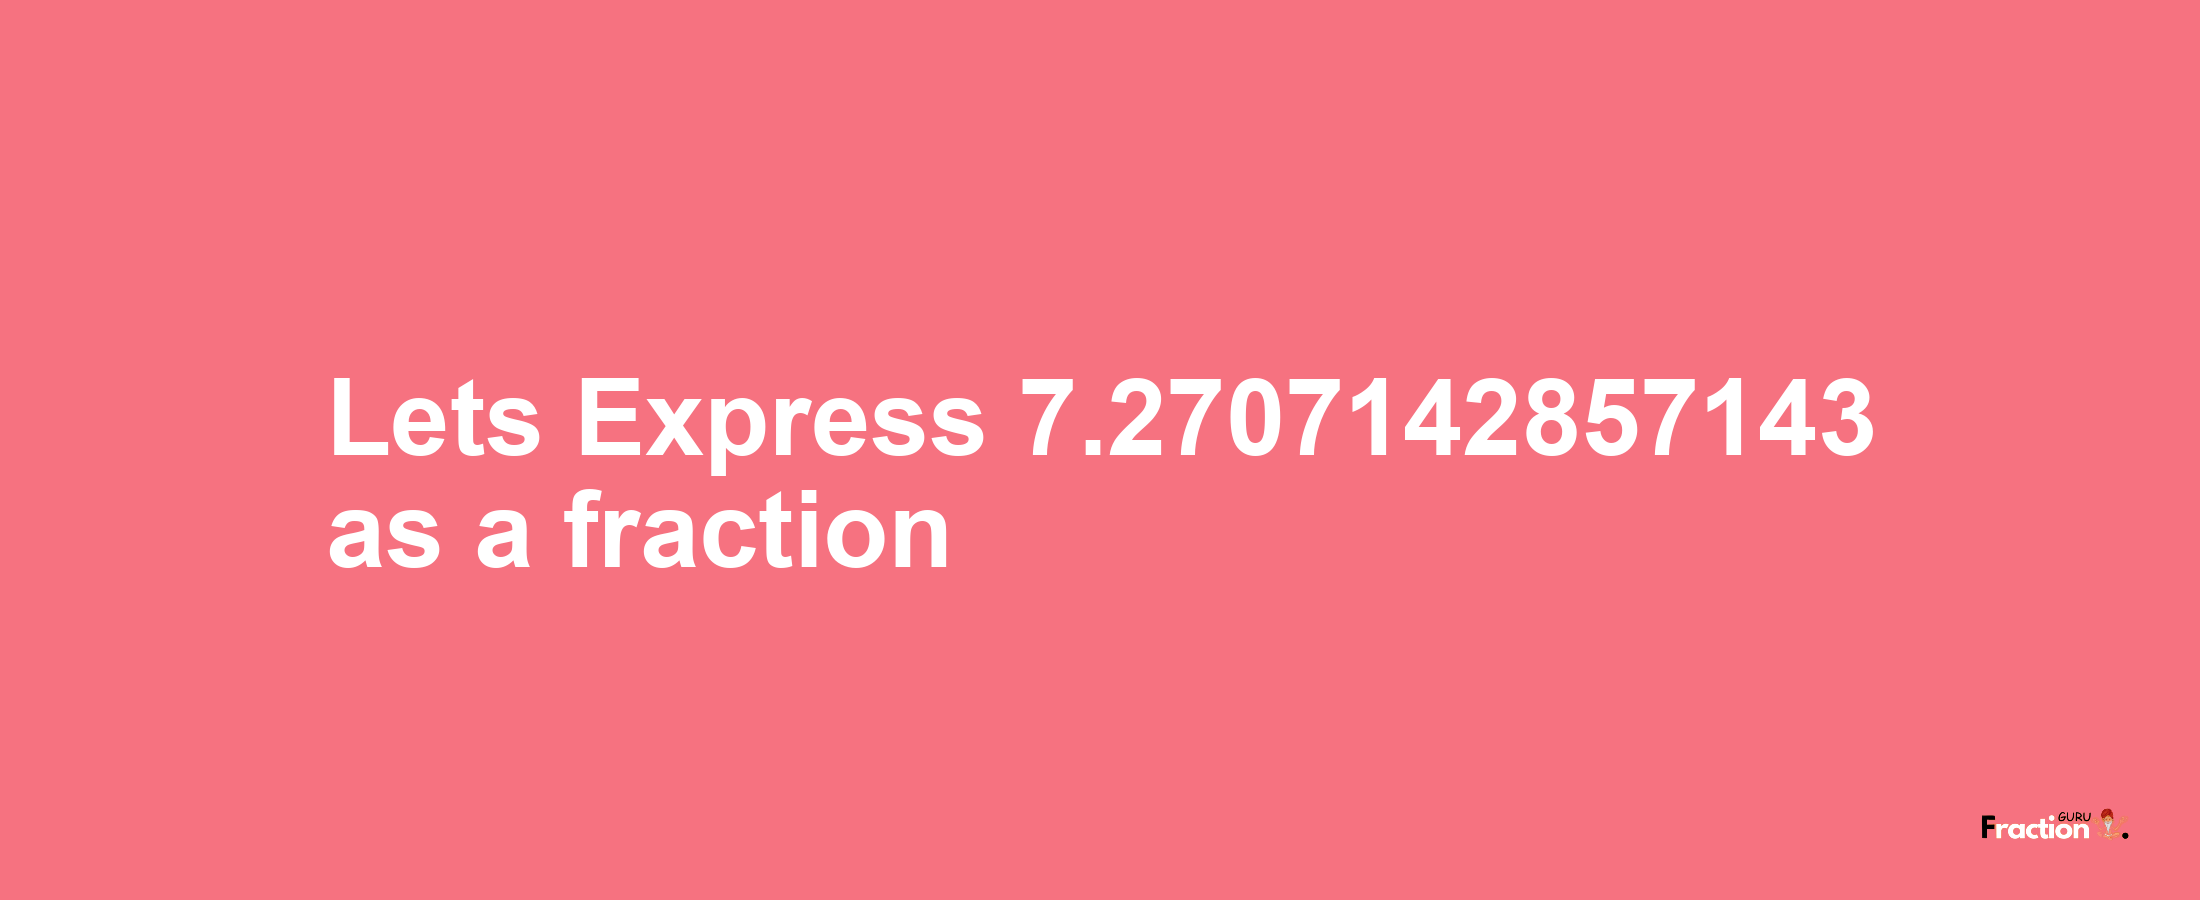 Lets Express 7.2707142857143 as afraction